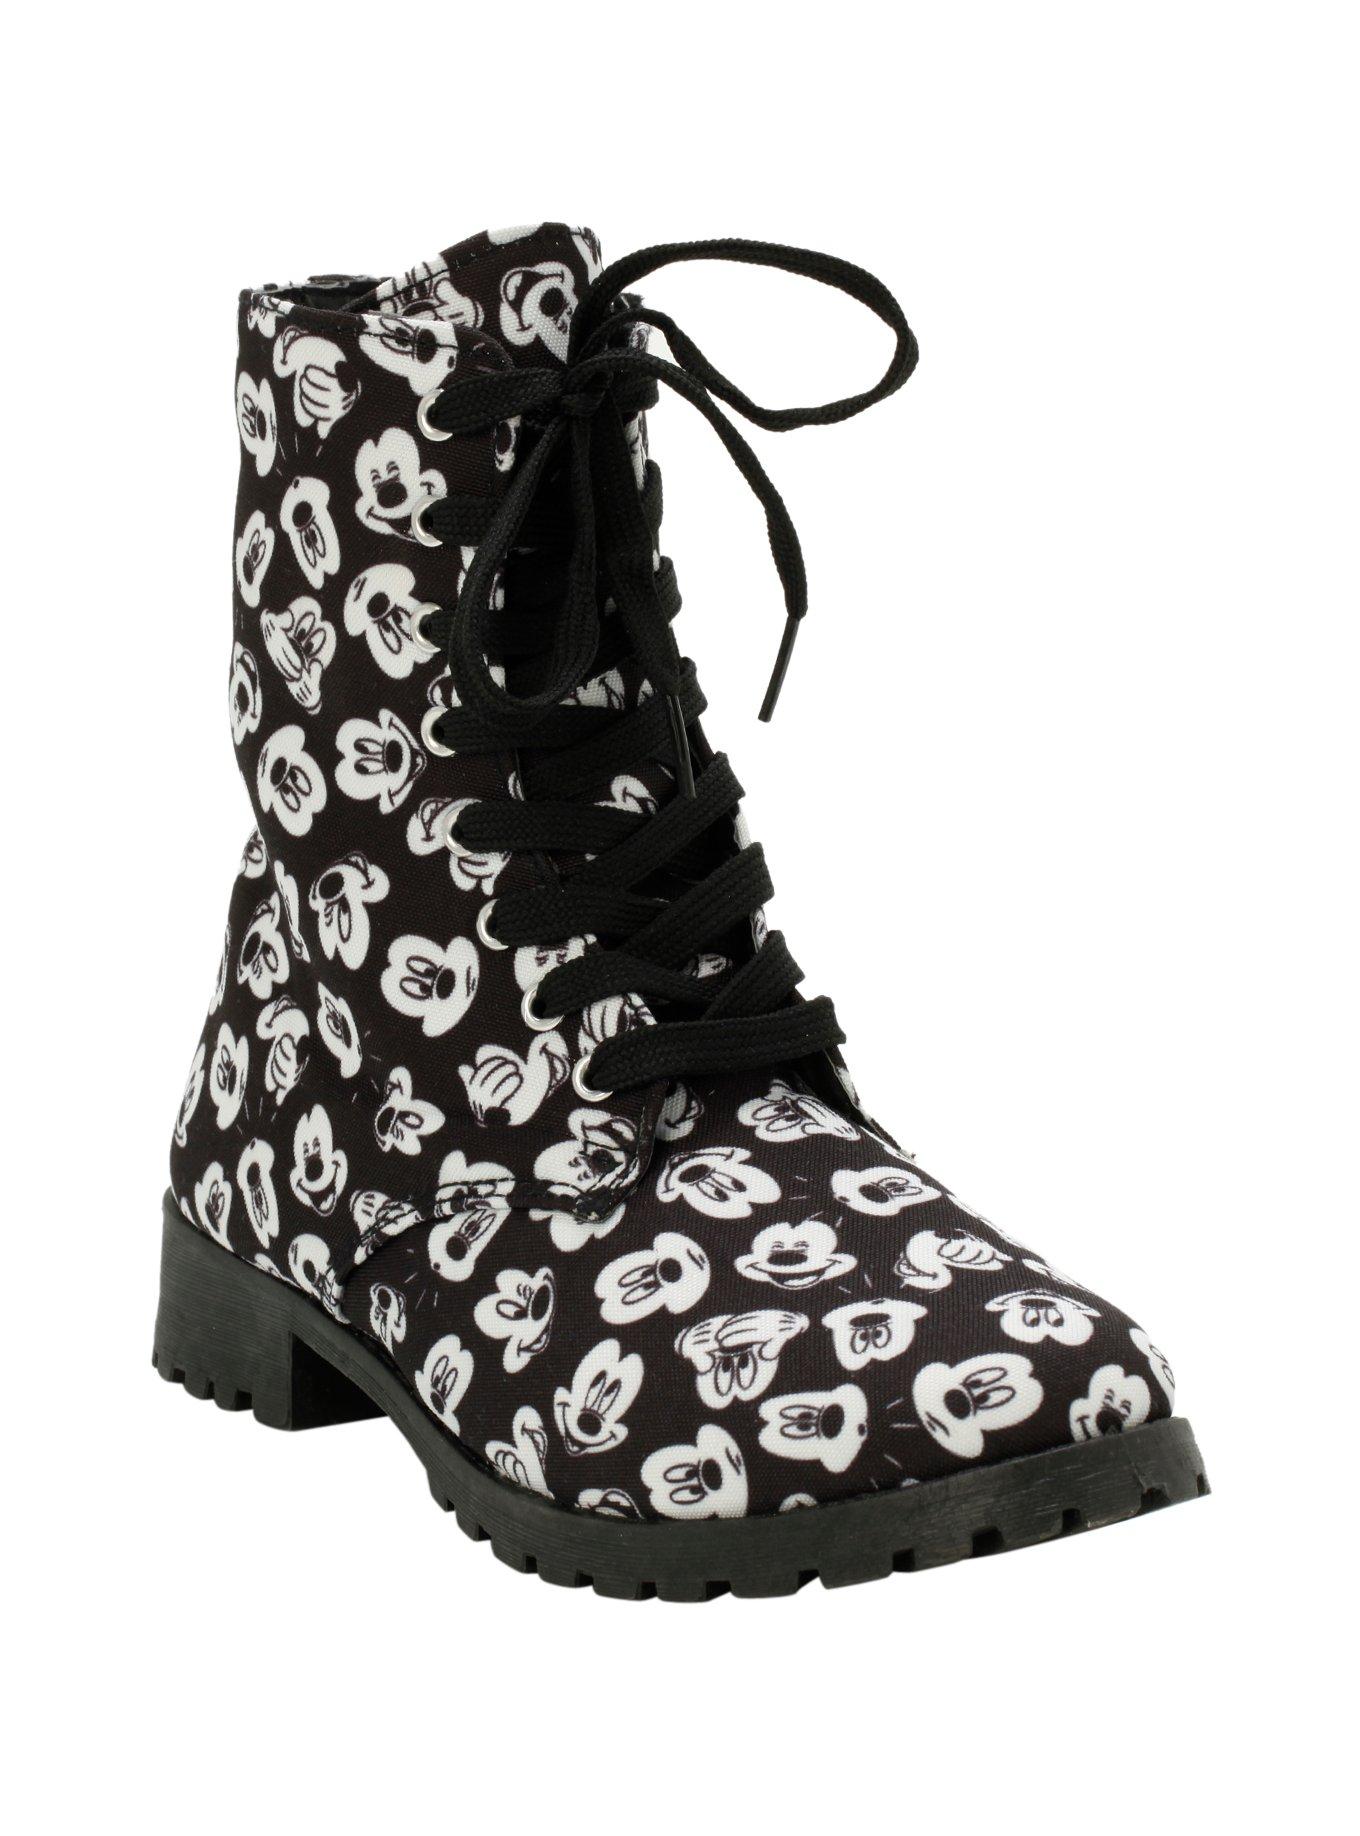 Disney Mickey Mouse Printed Boots, BLACK, hi-res